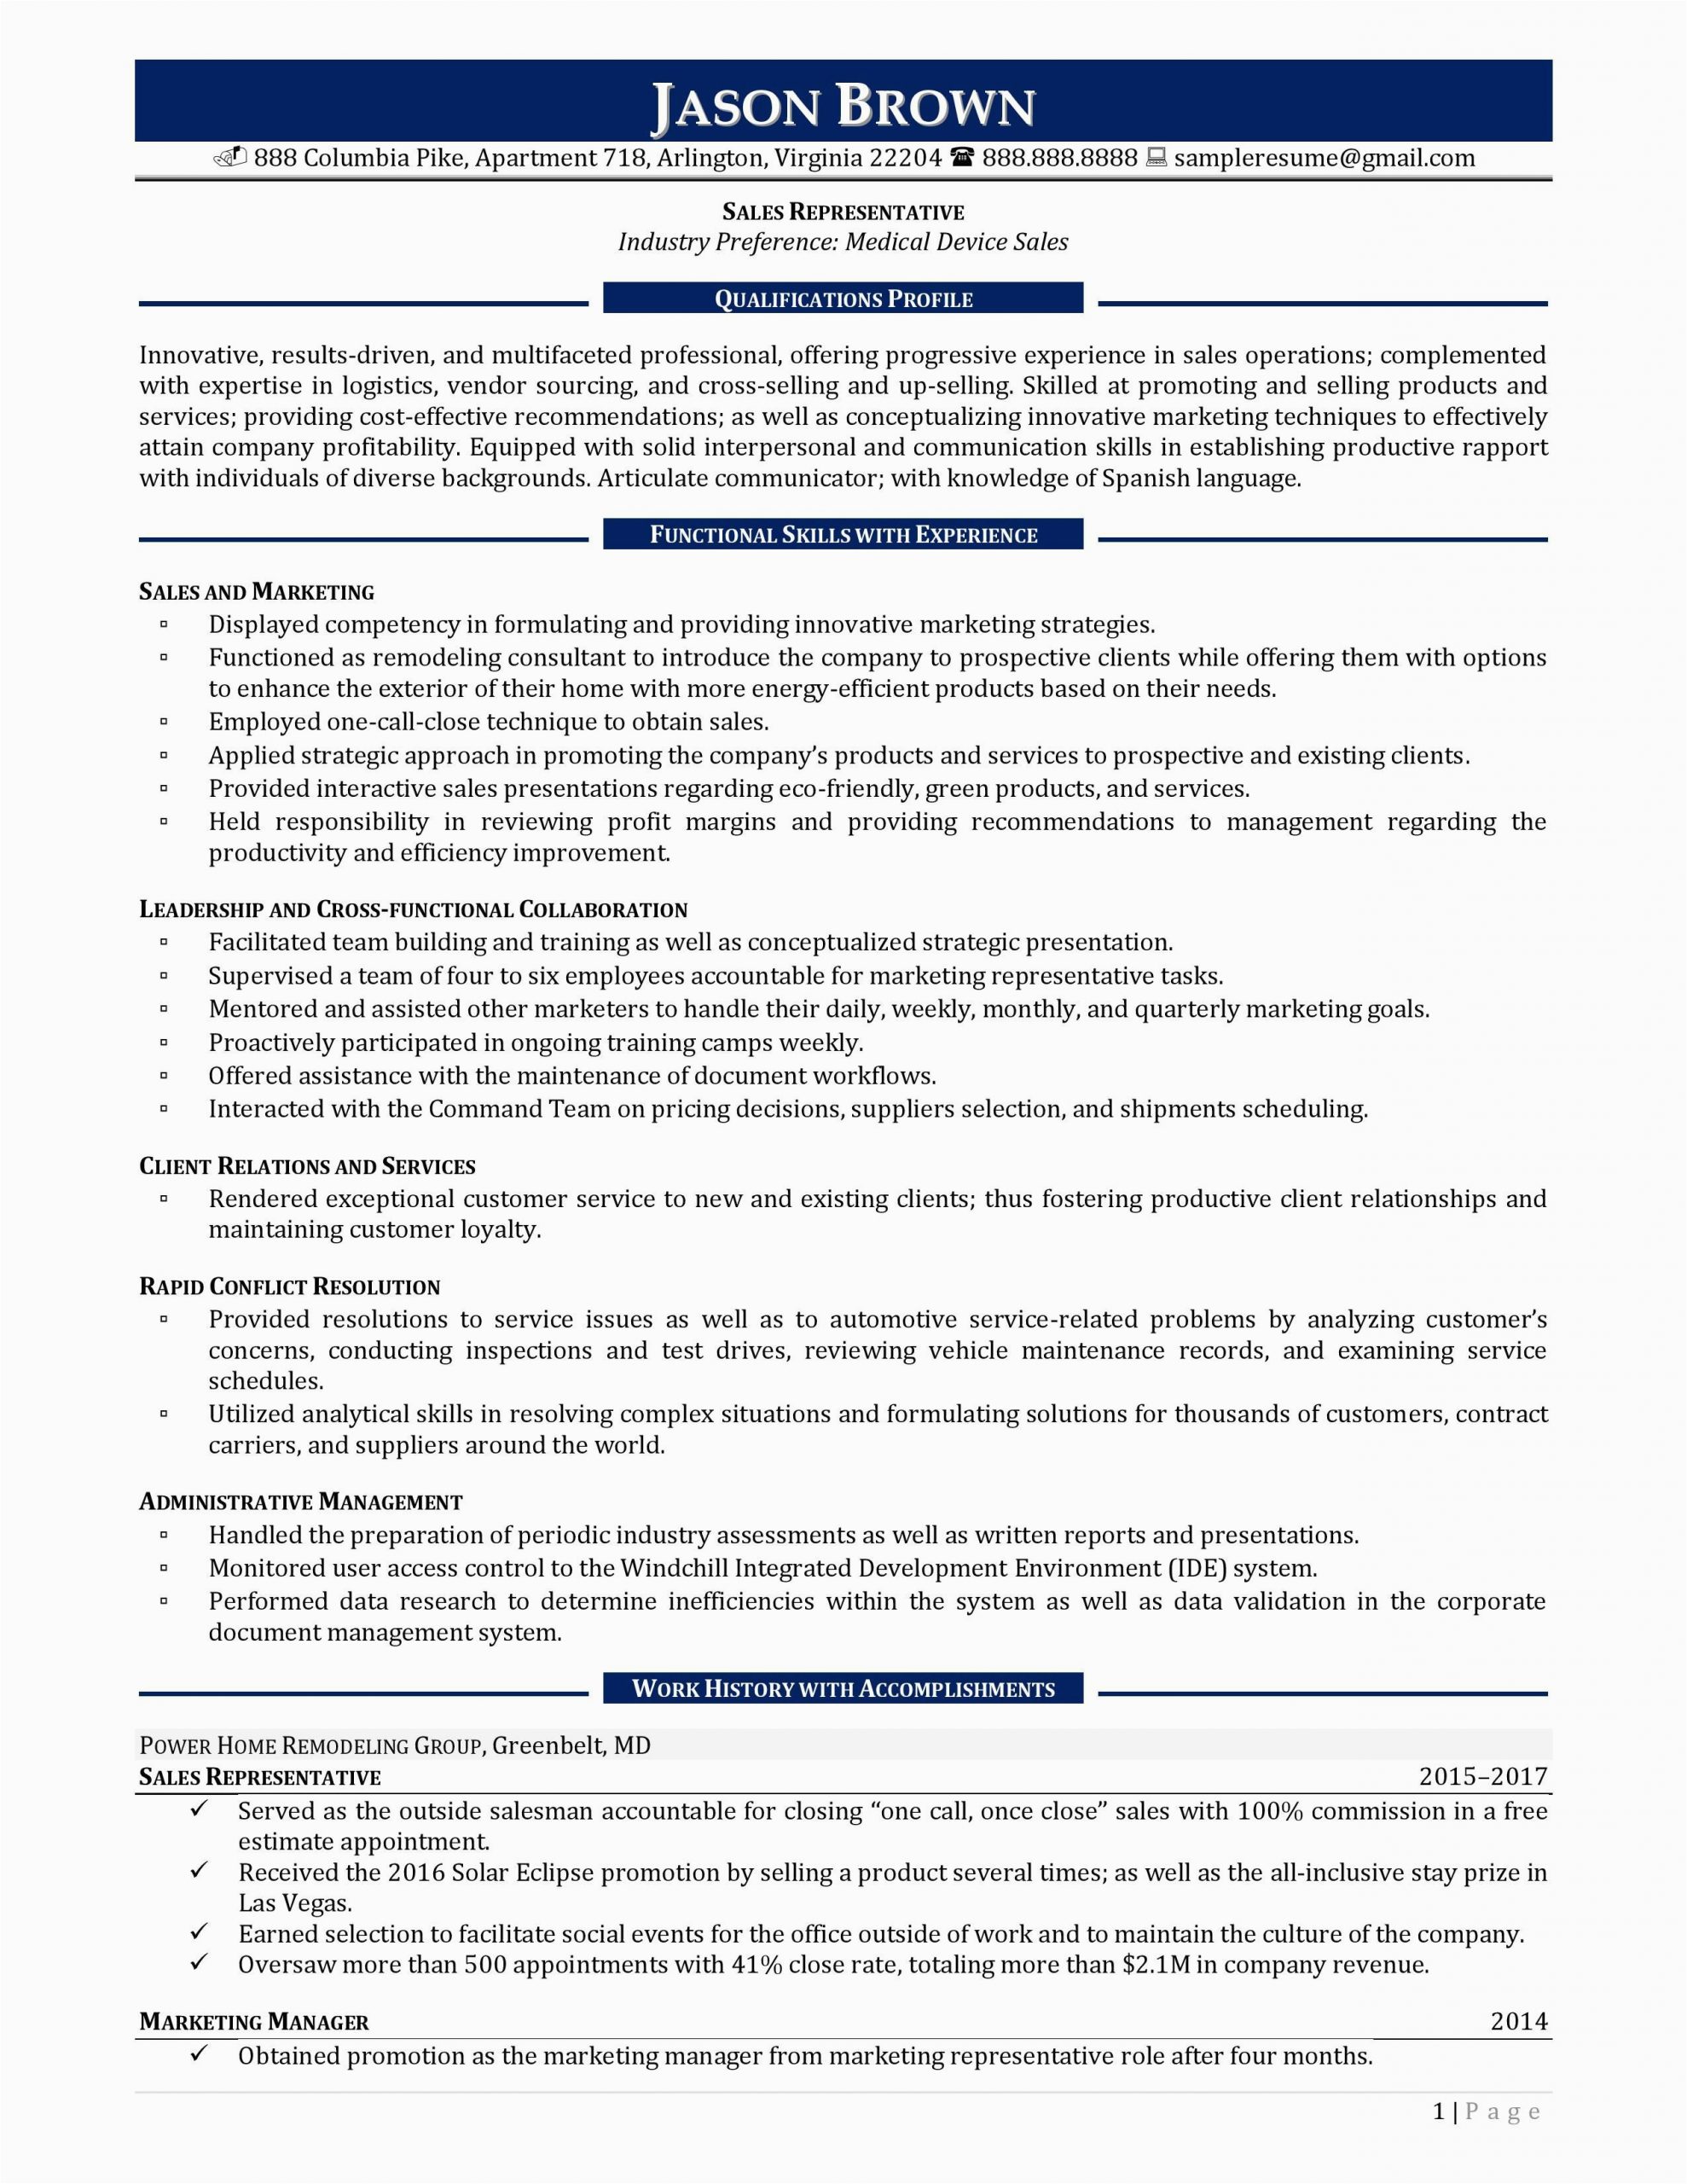 Sample Resume for Sales Representative with No Experience Sales Representative Resume Examples